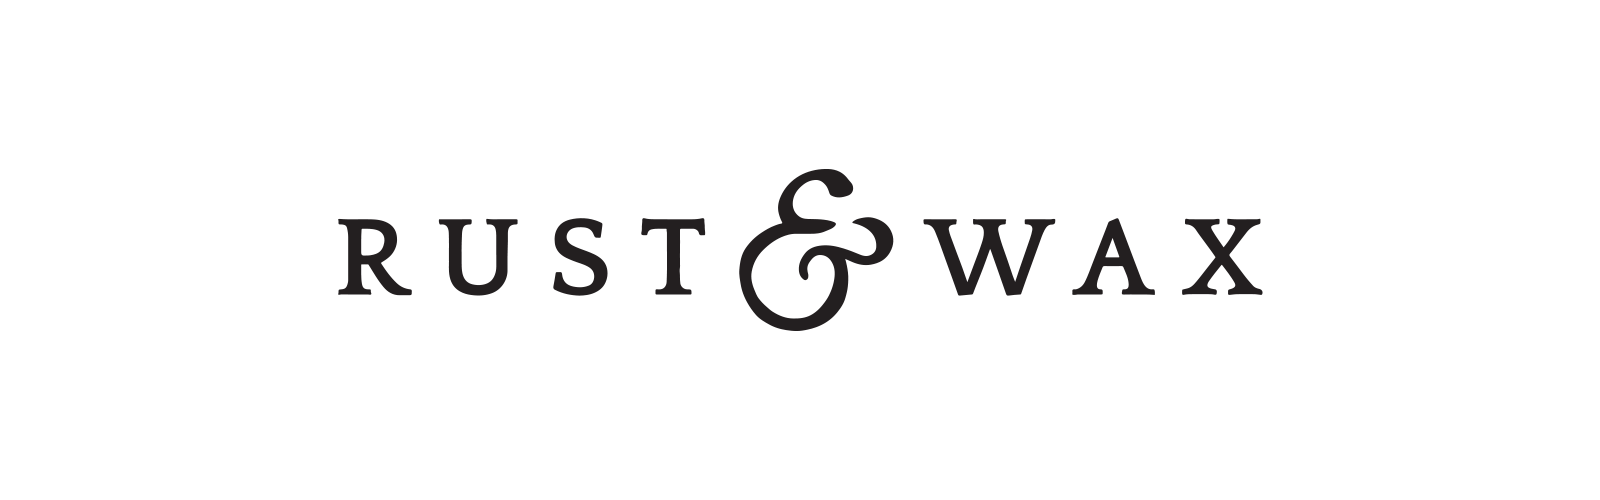 Rust & Wax Record Shop logo design features serif type and an oversized decorative ampersand.